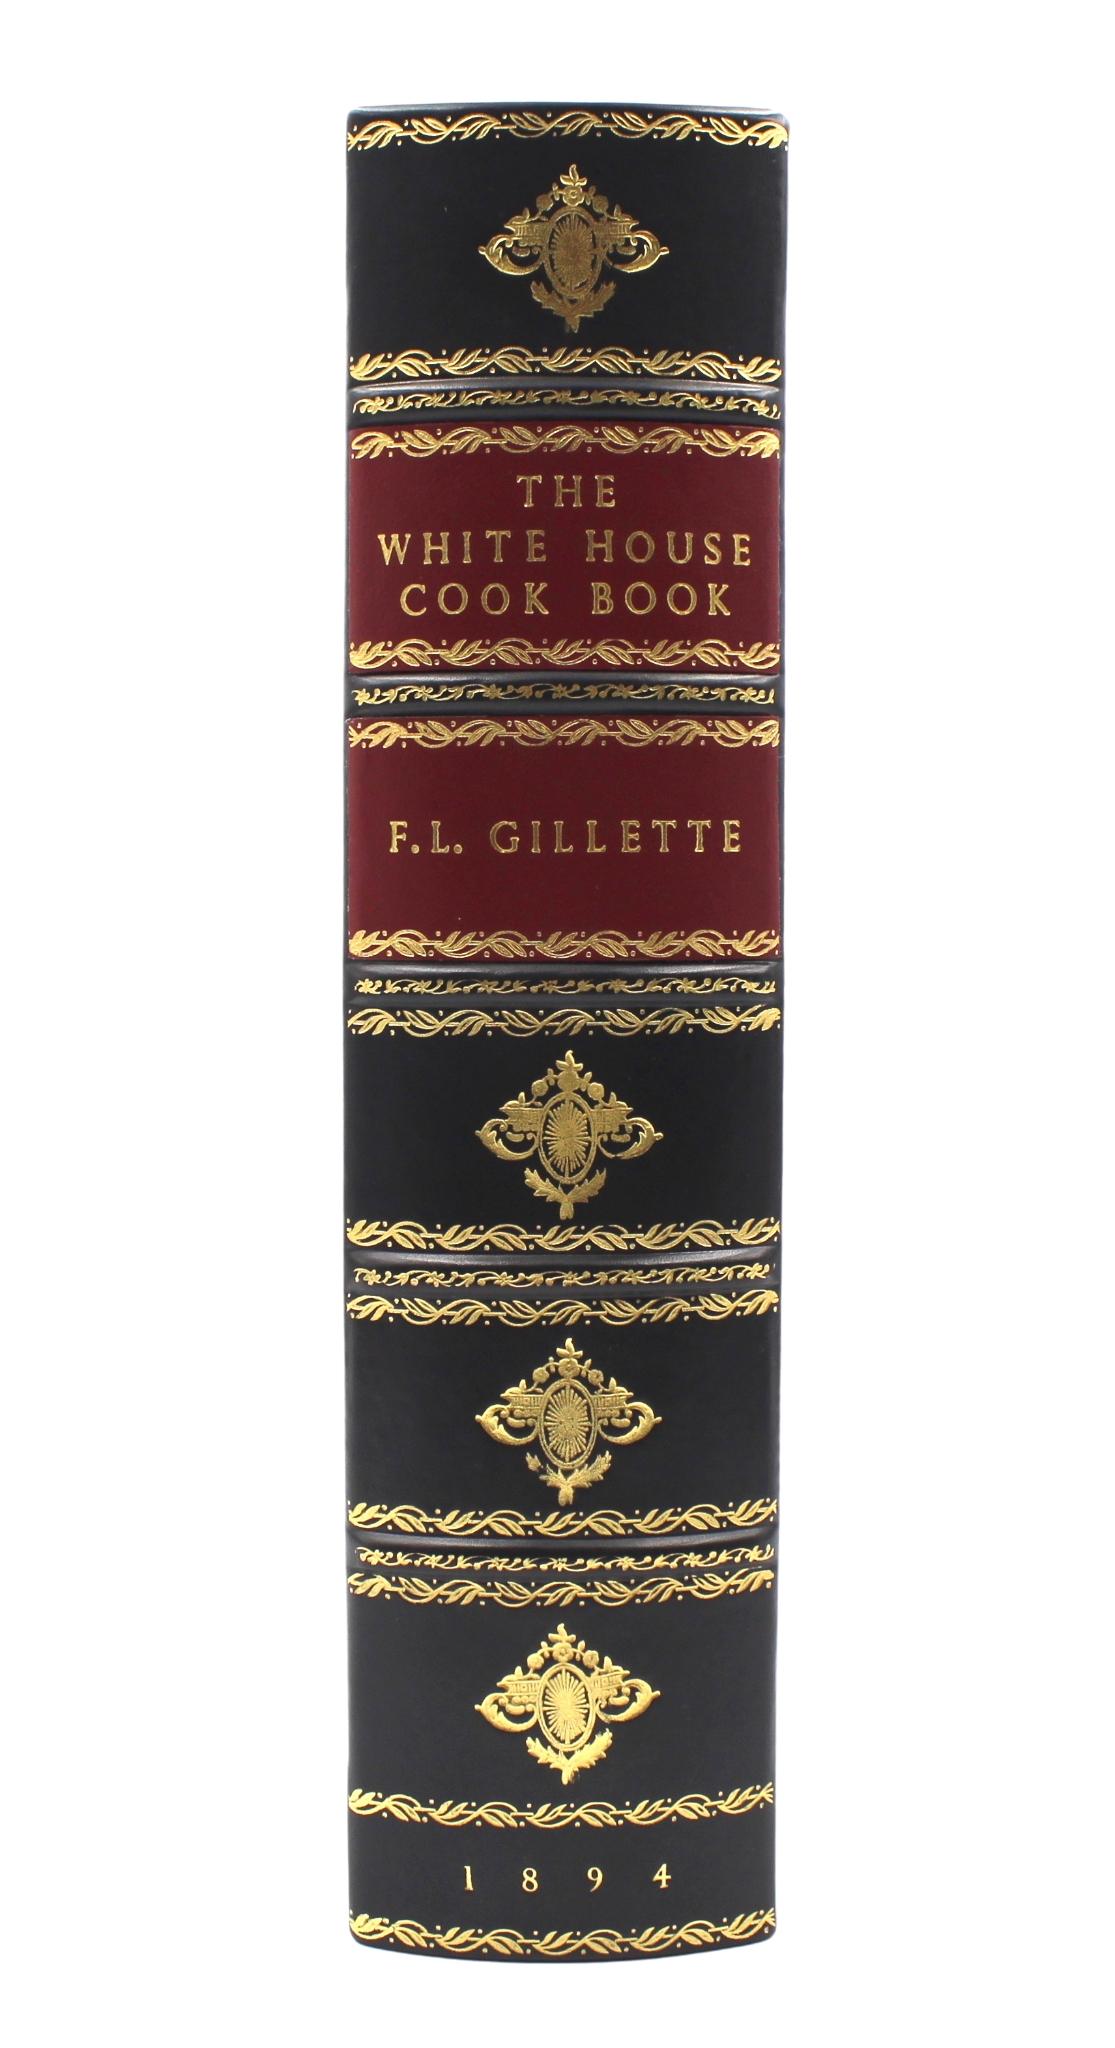 The White House Cookbook by F. L. Gillette, Later Printing, 1894 For Sale 8